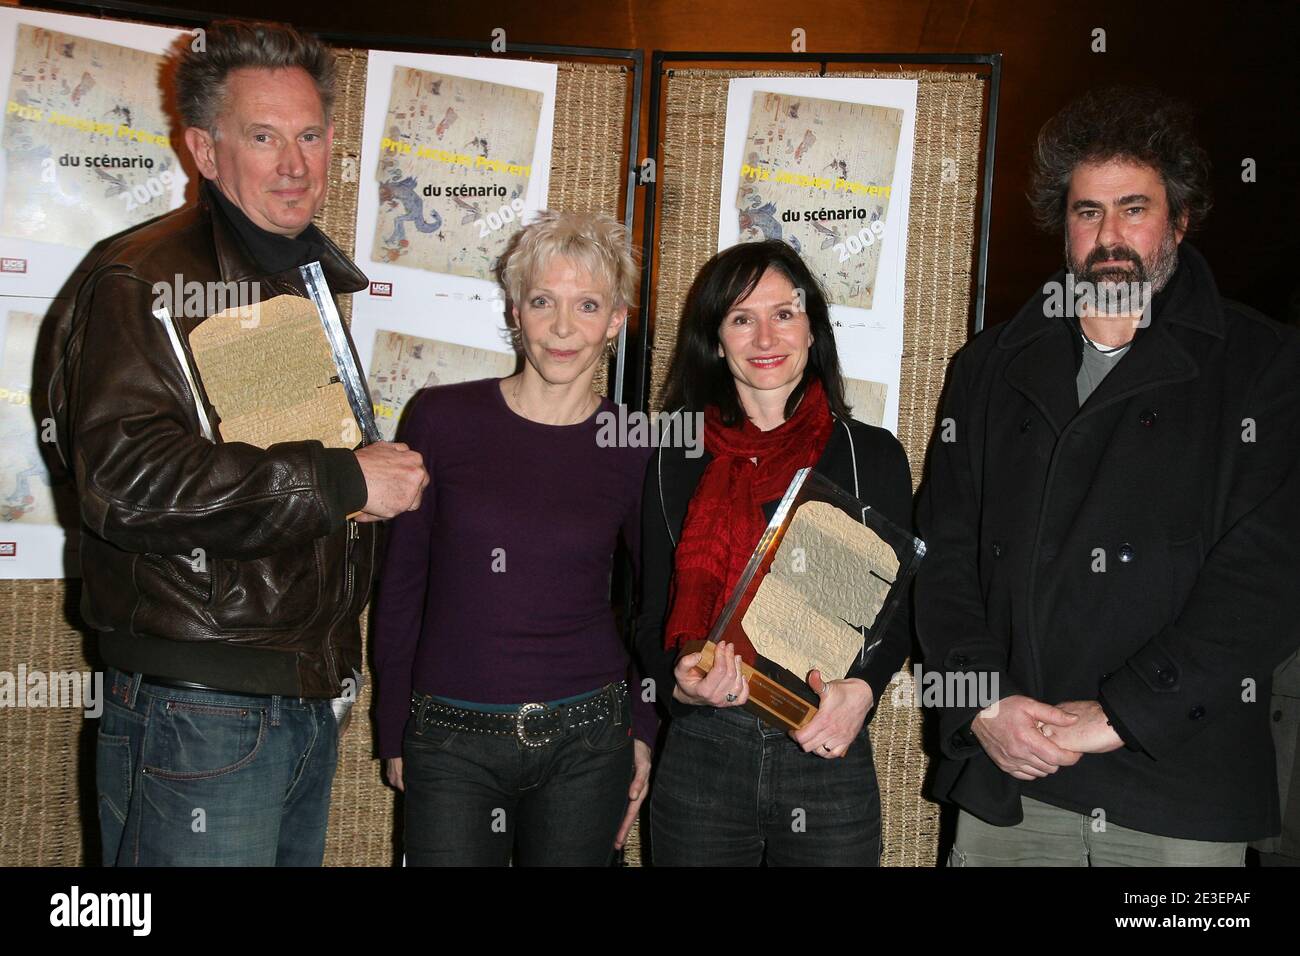 Tonie Marshall with Winners Benoit Delepine, Marion Laine and Gustave Kervern pose during the 'Prix Jacques Prevert' held at Casino de Paris in Paris, France on February 4, 2009. Photo by Denis Guignebourg/ABACAPRESS.COM Stock Photo